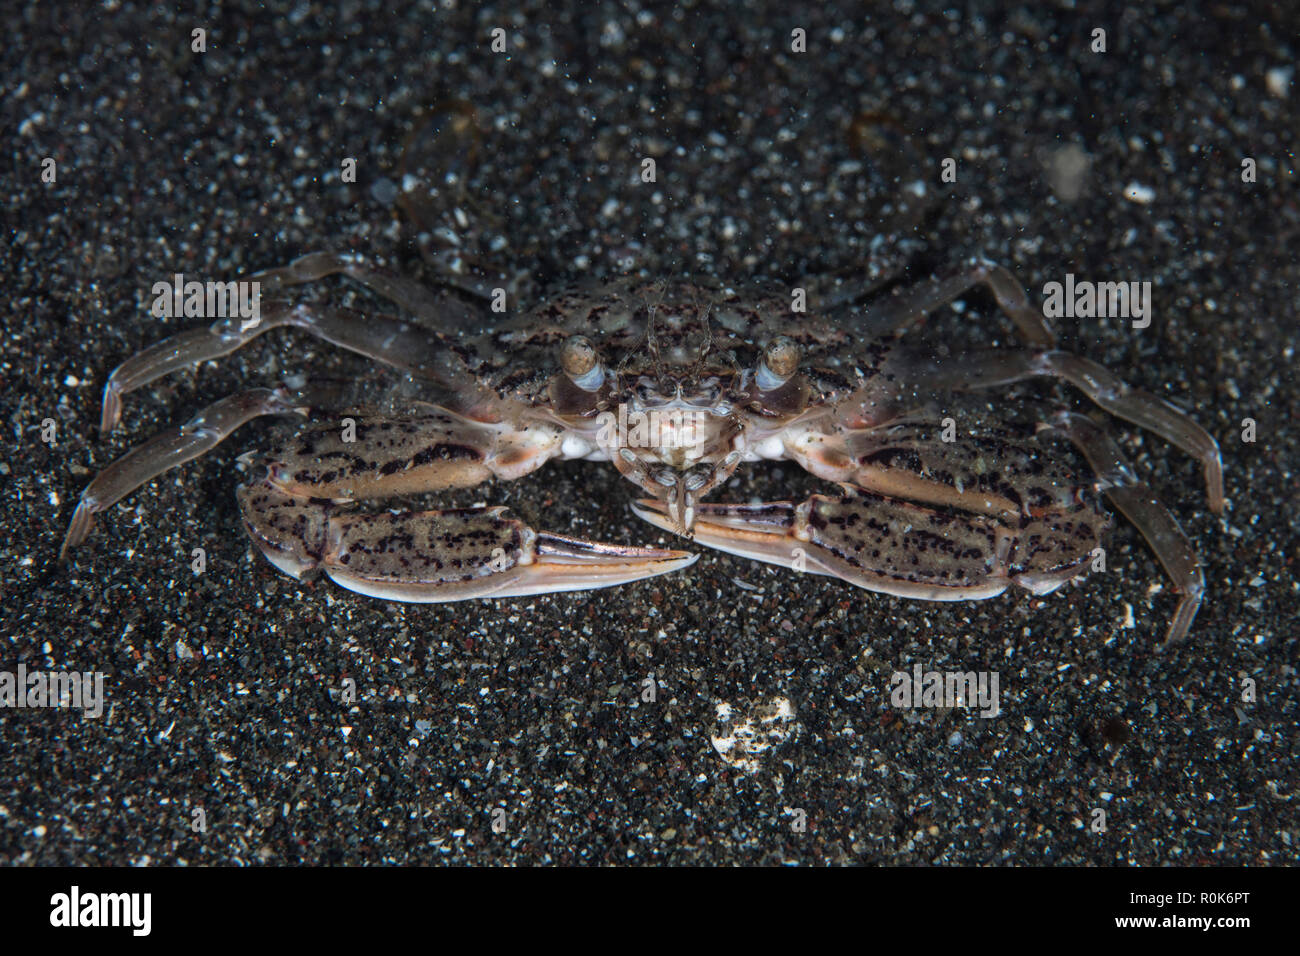 An unidentified swimming crab crawls across the seafloor. Stock Photo